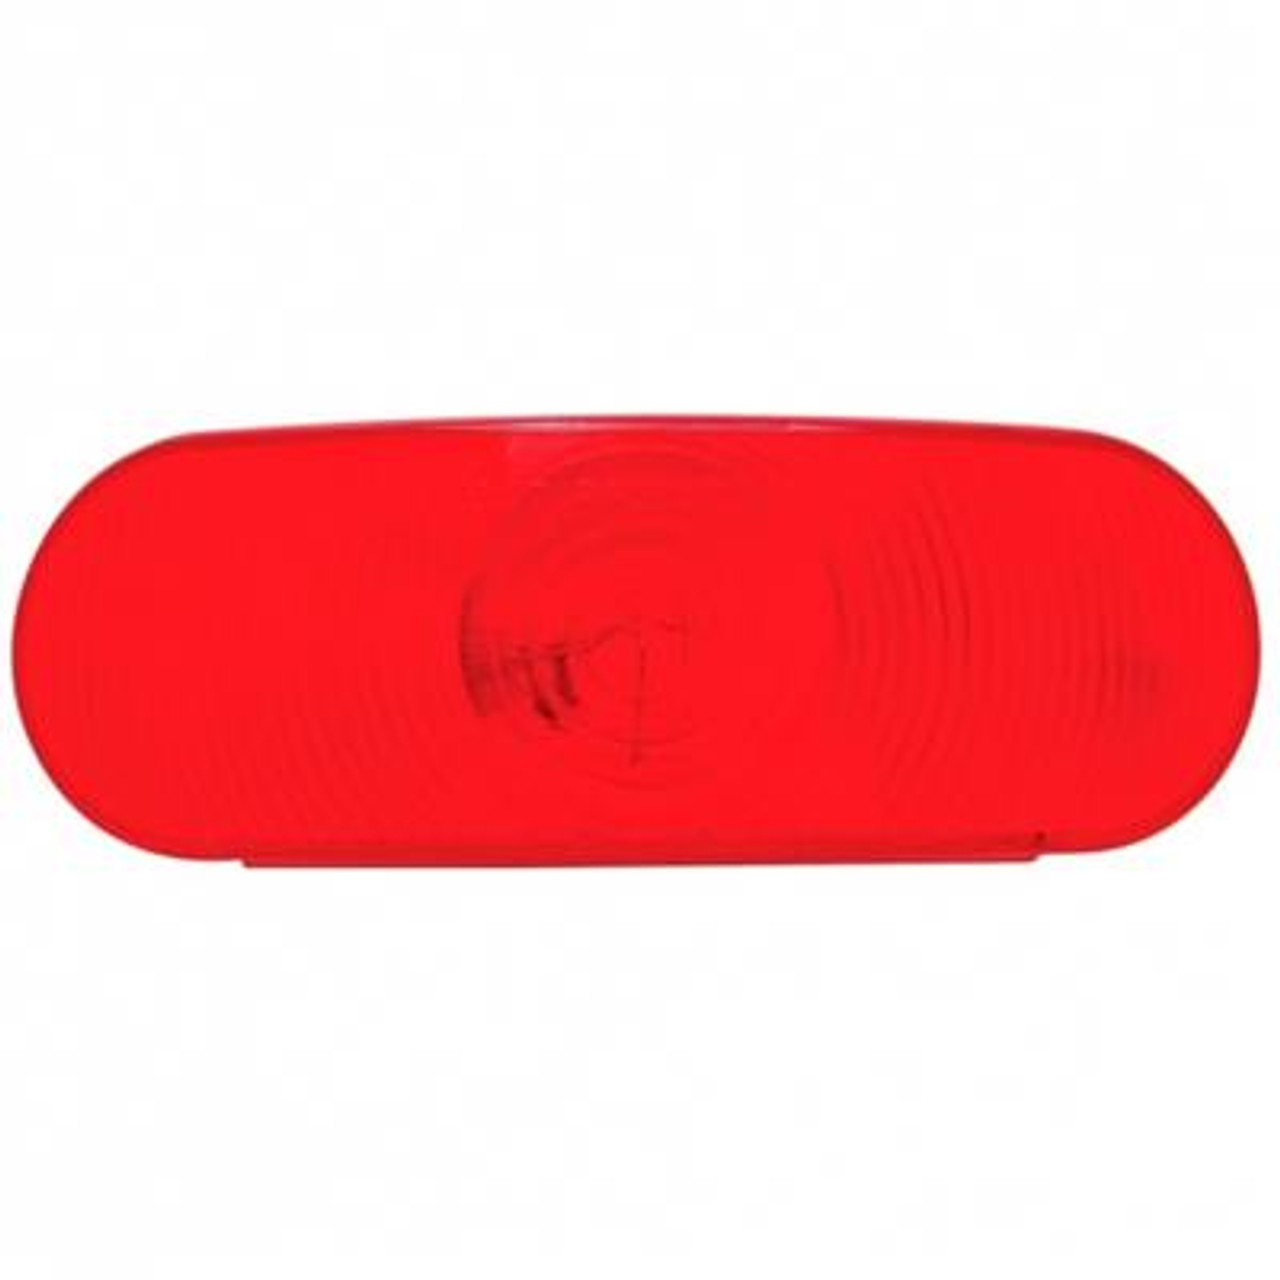 6" Oval Light Kit (Stop, Turn & Tail) - Red Lens